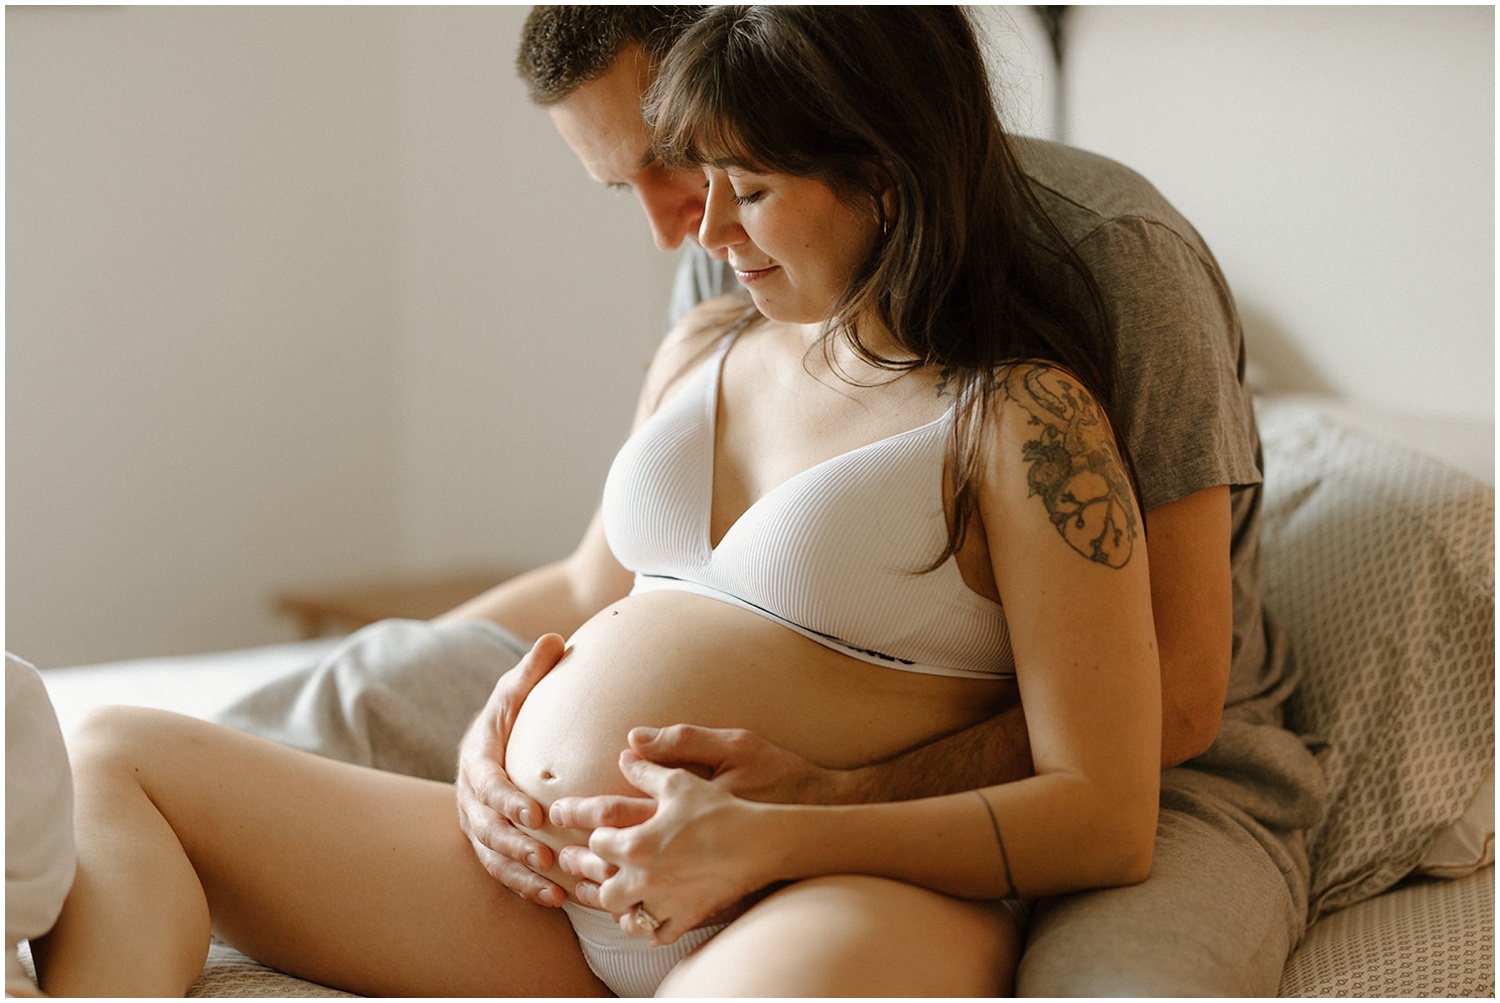 A woman leans against a man in a bed during pregnancy photography session.